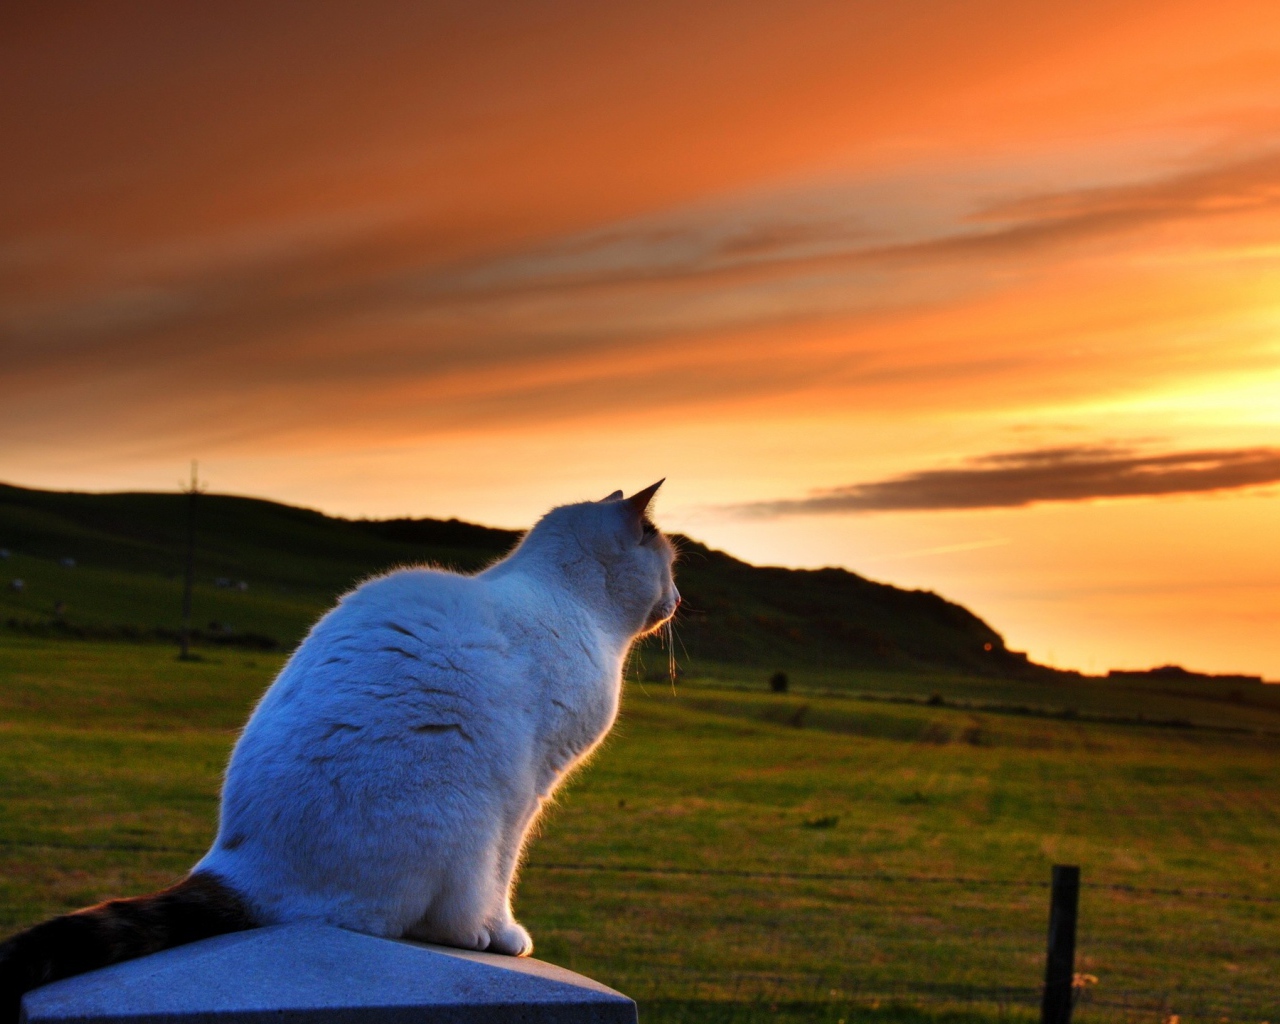 The cat sees the sun